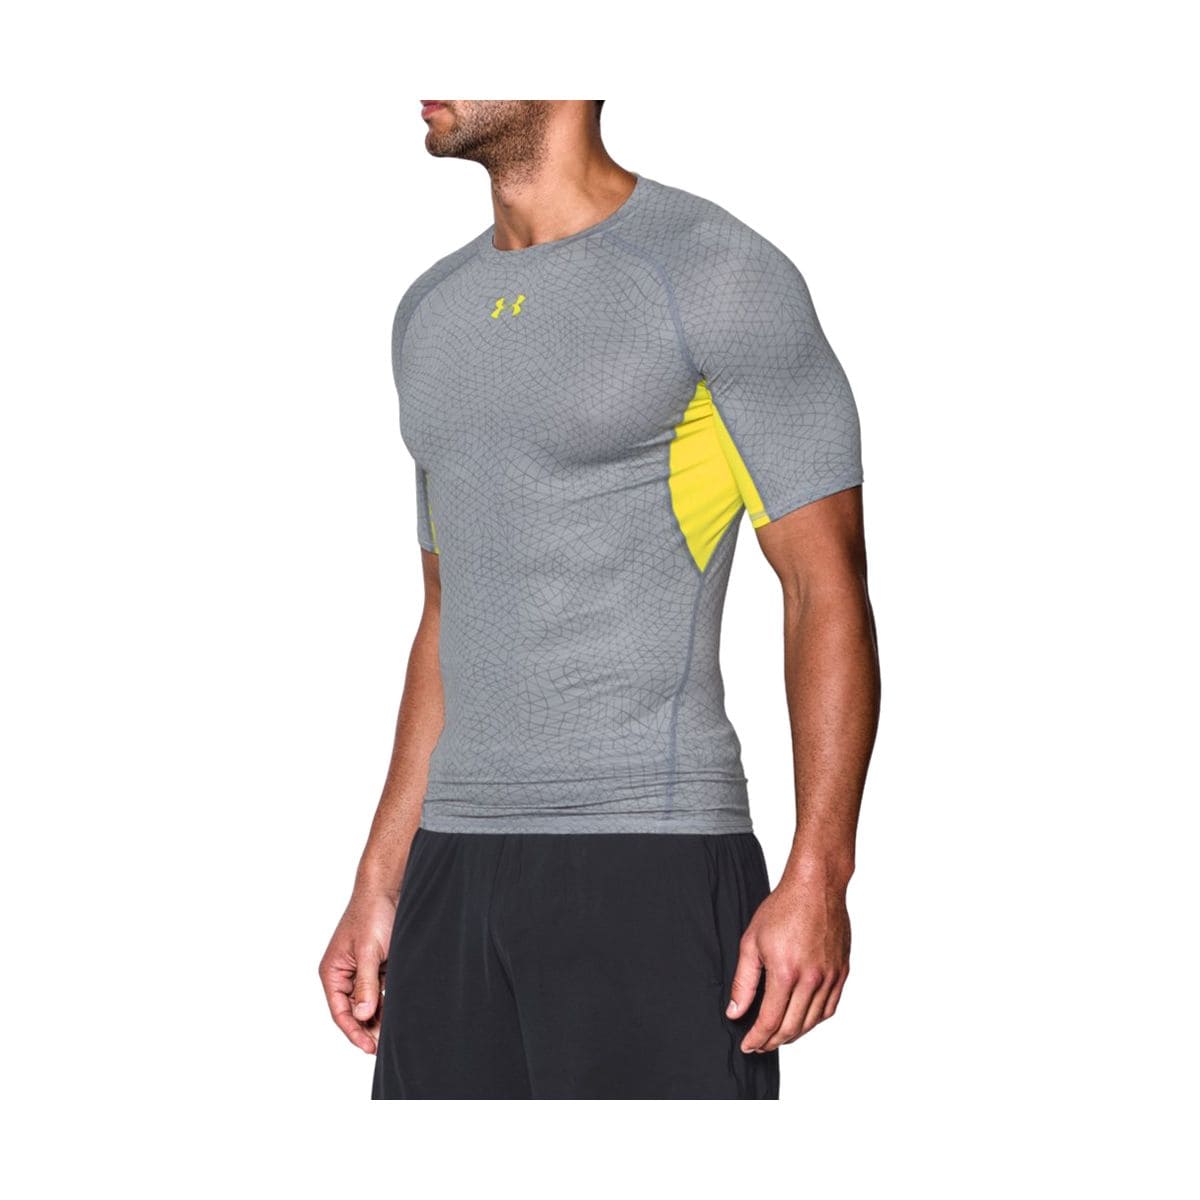 Under Armour HeatGear Armour Printed Compression Shirt - Men's - Clothing